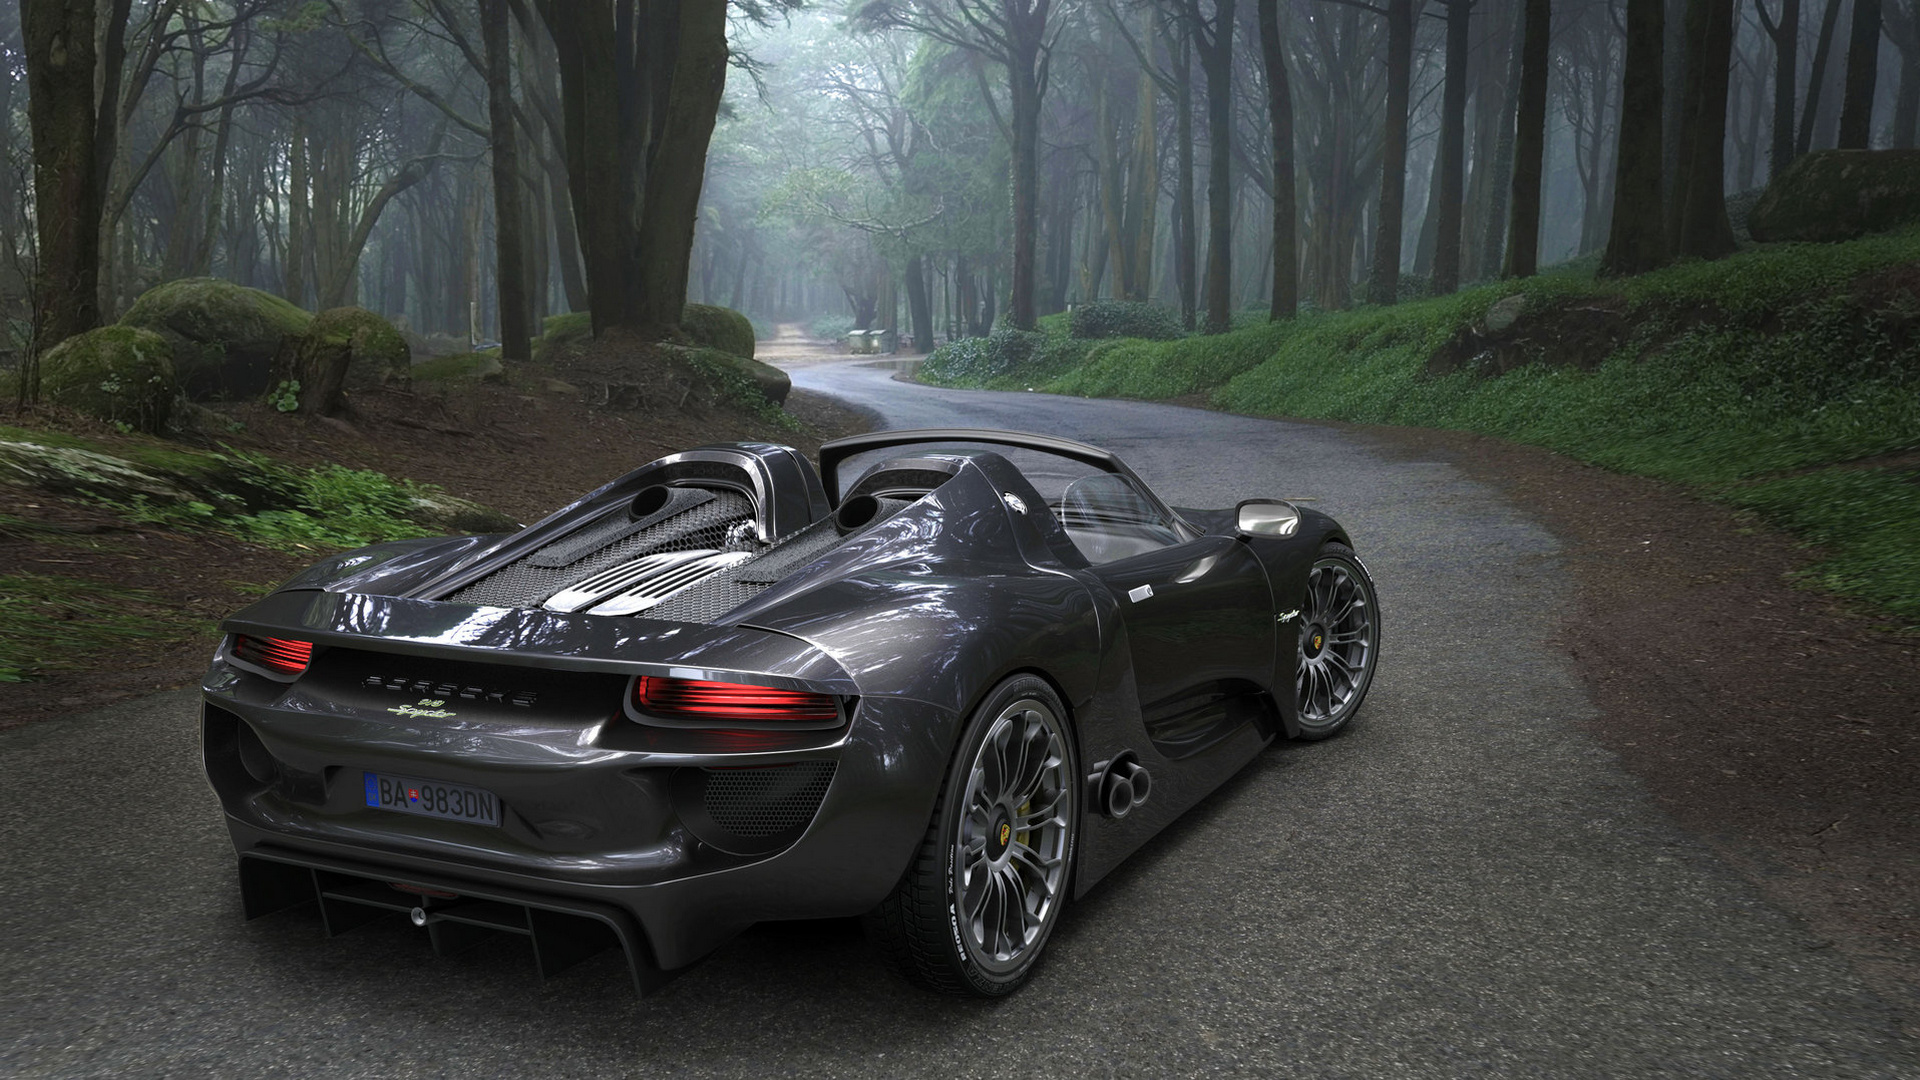 A cool sports car on a forest road